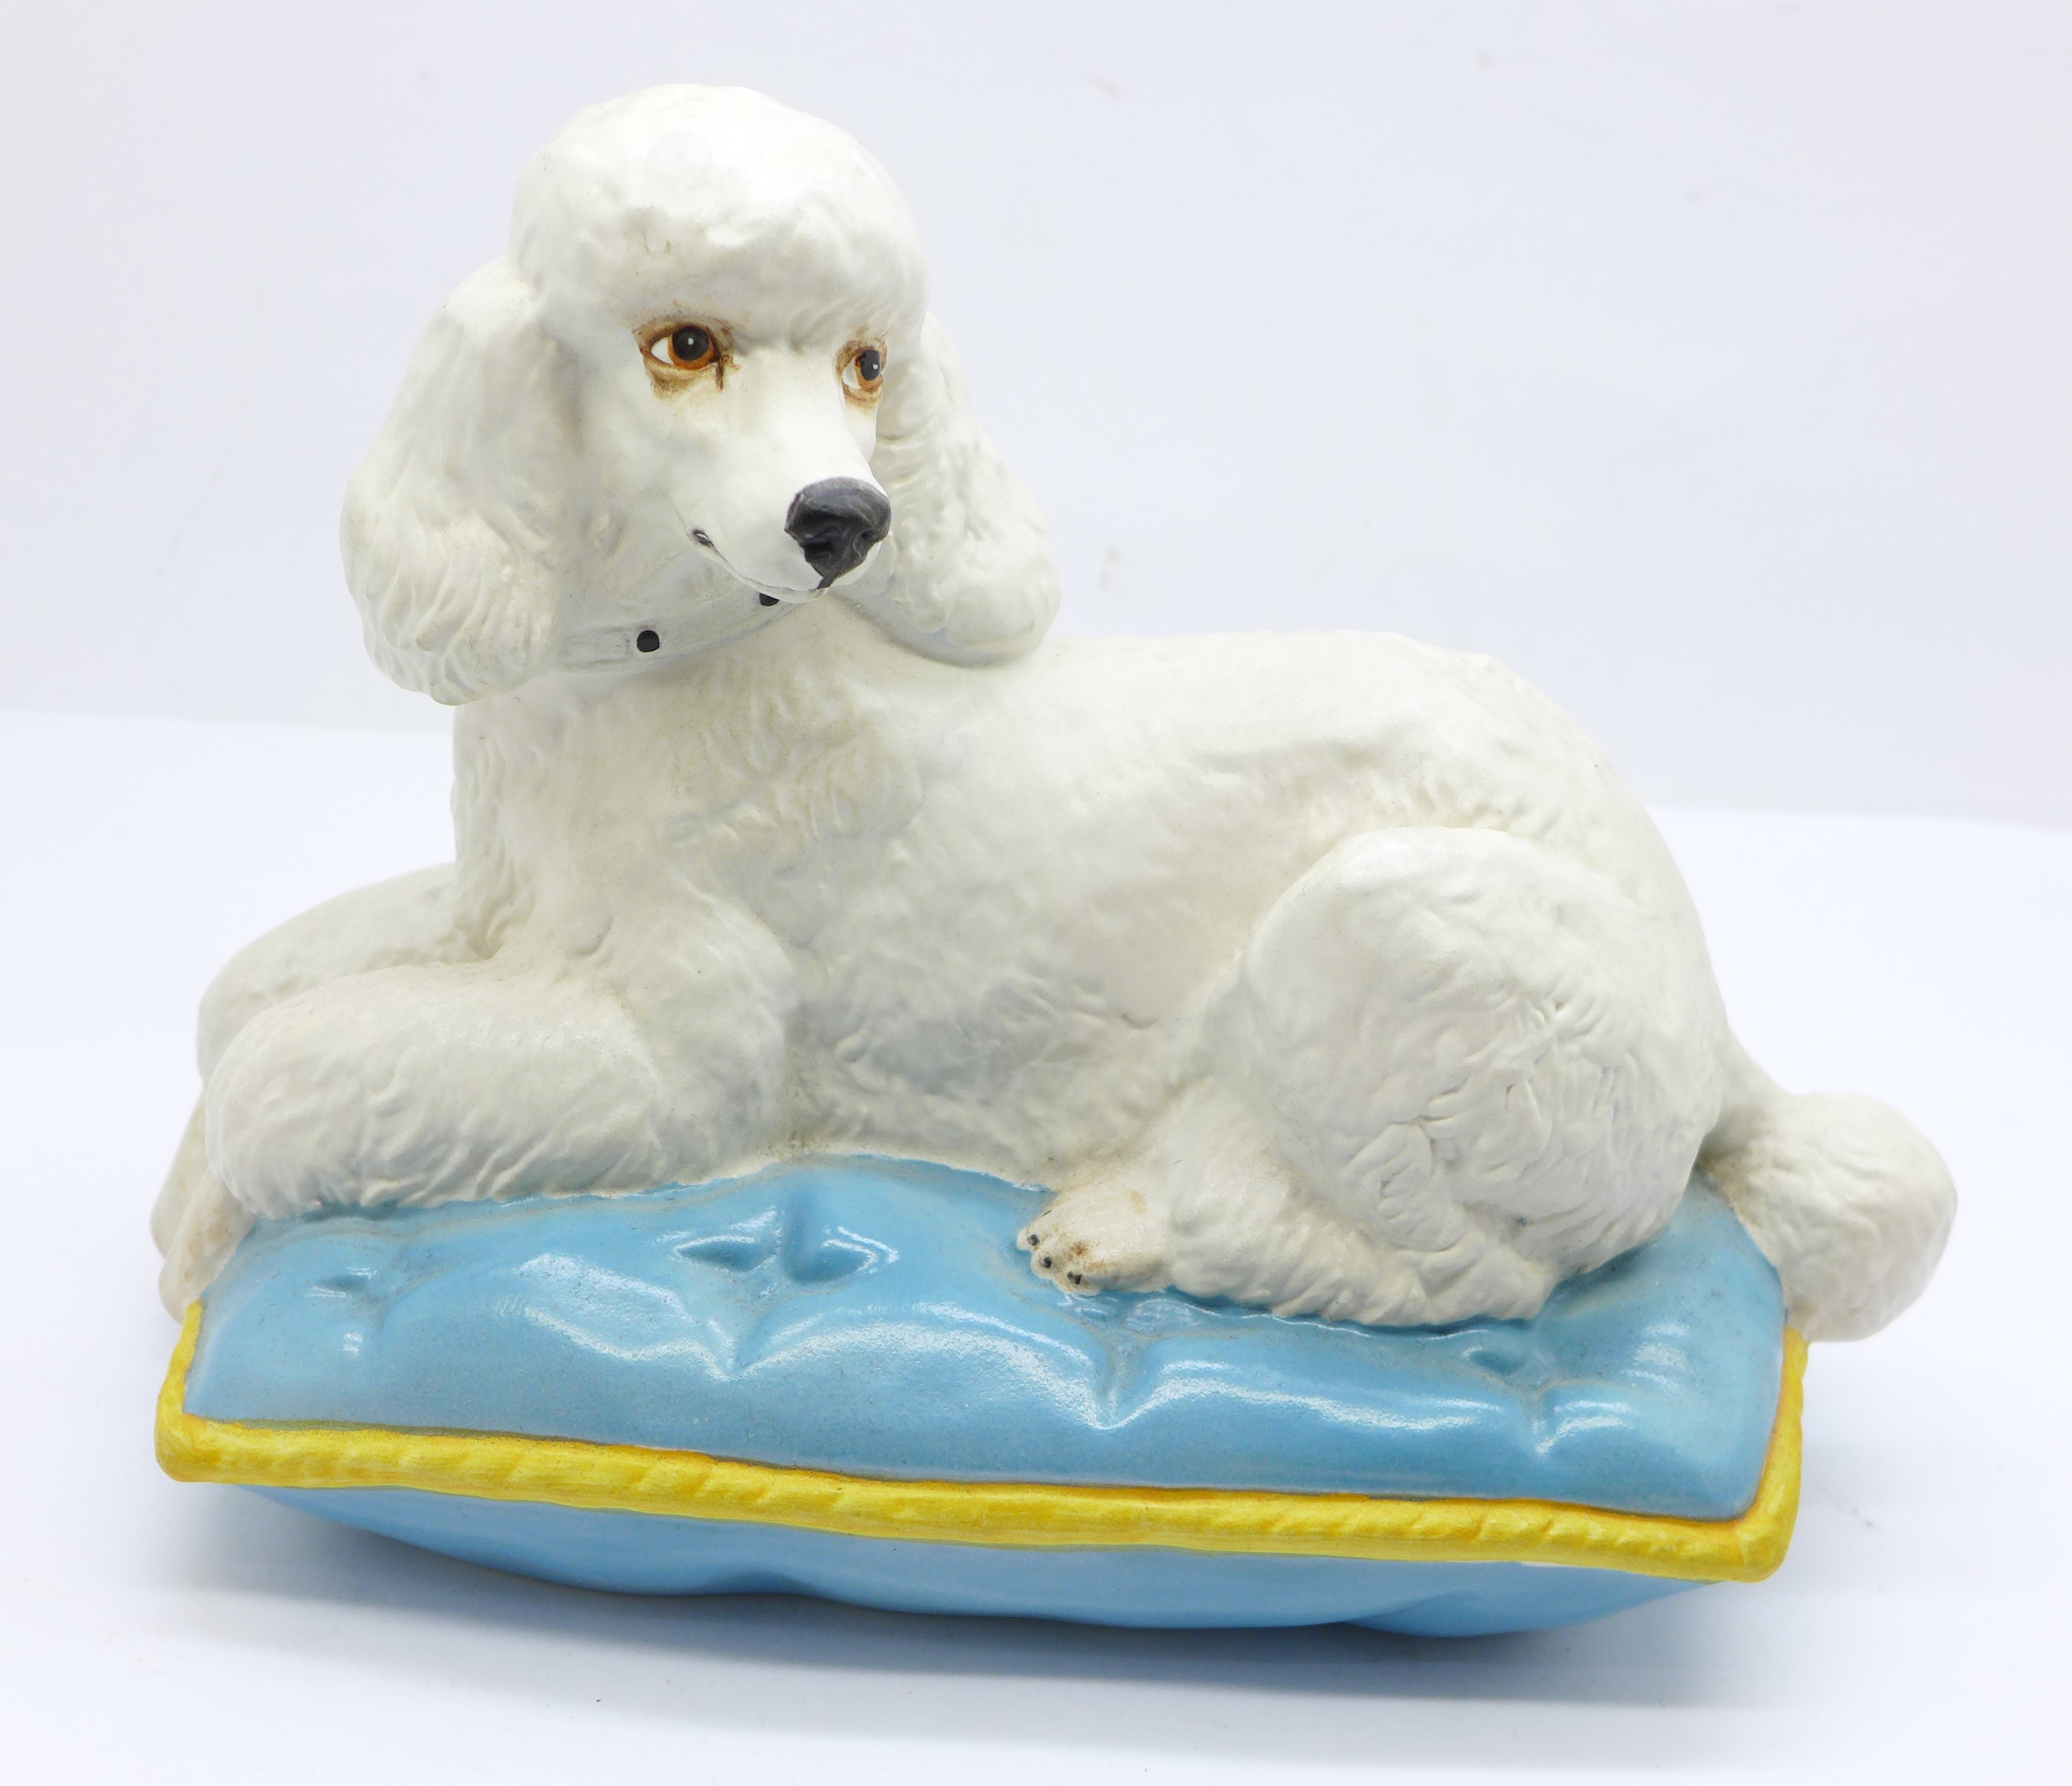 A Royal Doulton model of a poodle laying on a cushion